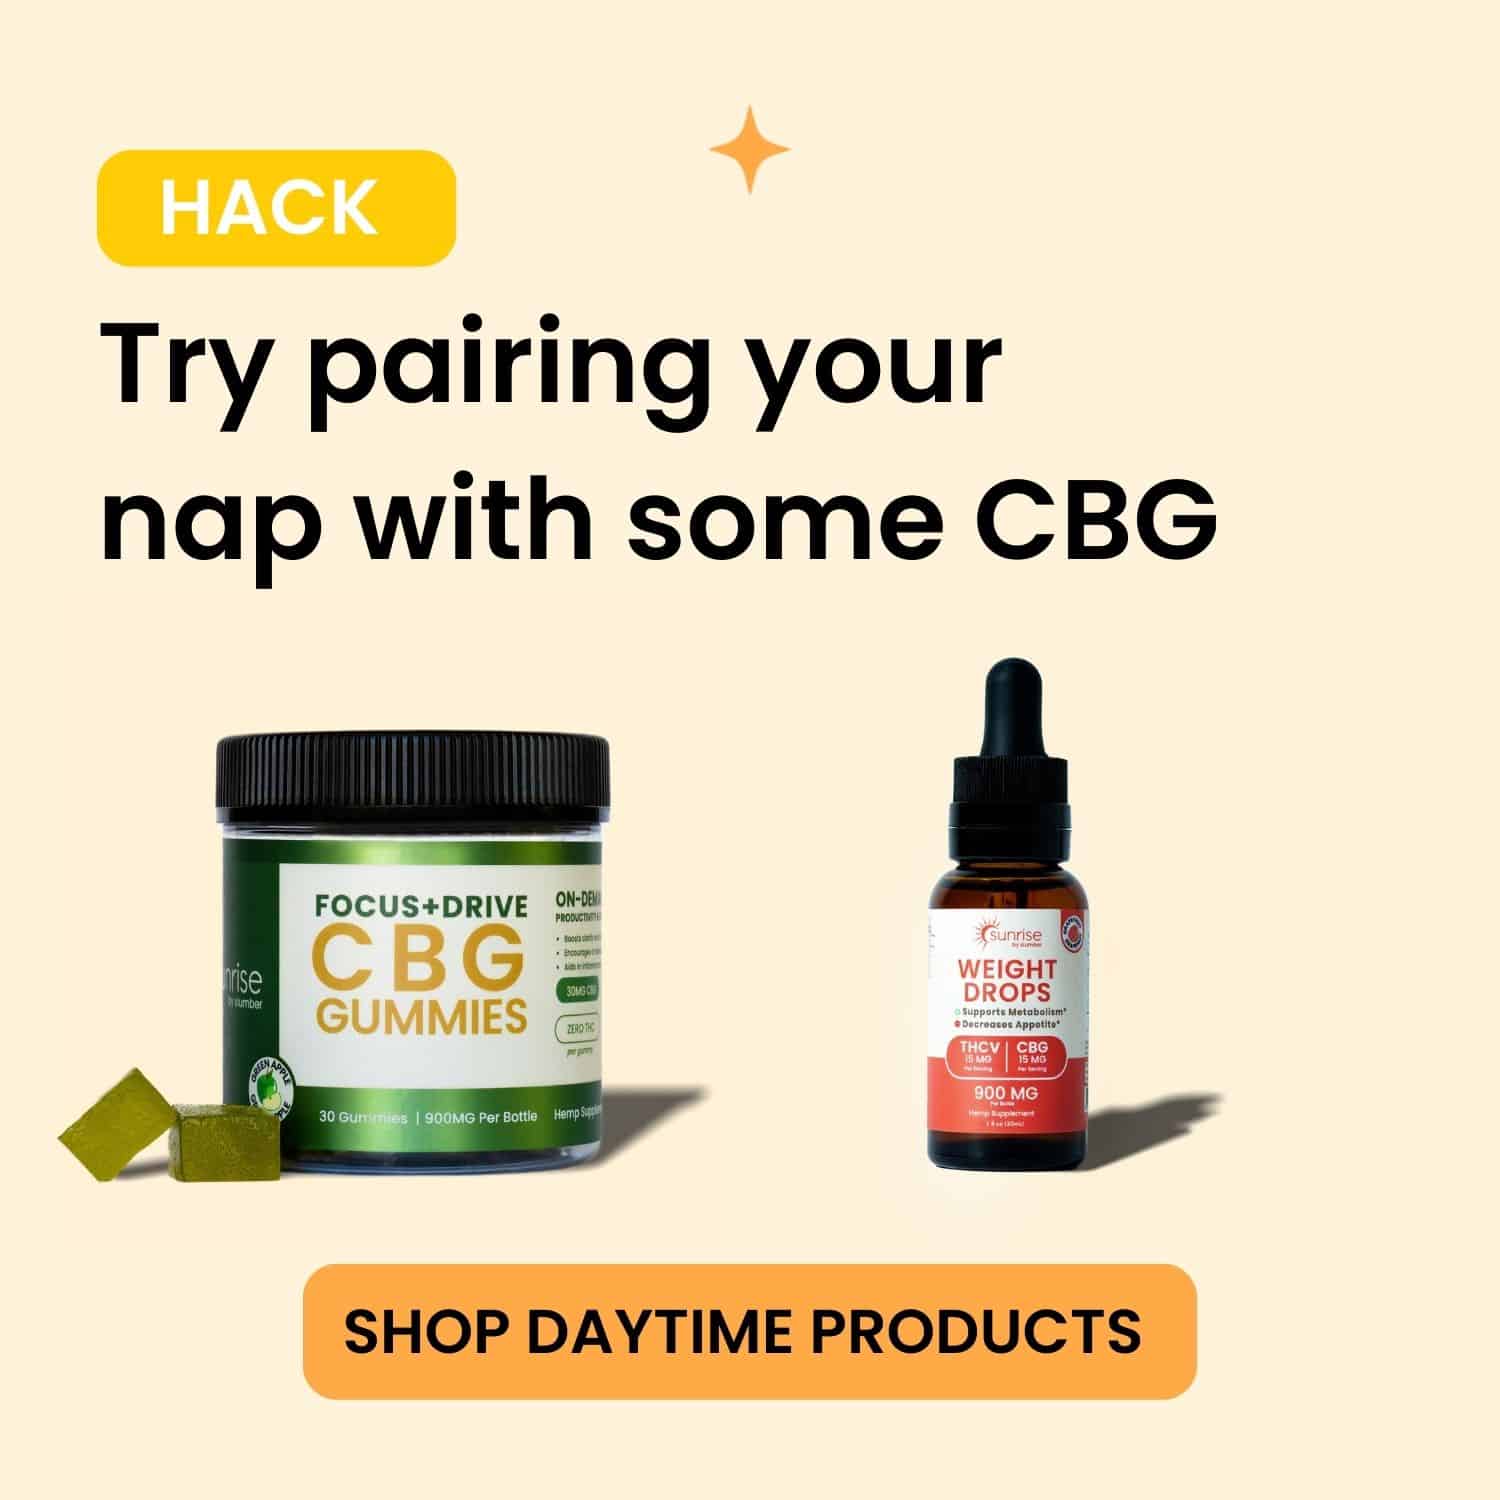 Infographic featuring 'FOCUS+DRIVE CBG Gummies' and 'Sunrise Weight Drops' with a call to action, 'SHOP DAYTIME PRODUCTS,' promoting CBG for energy and focus.